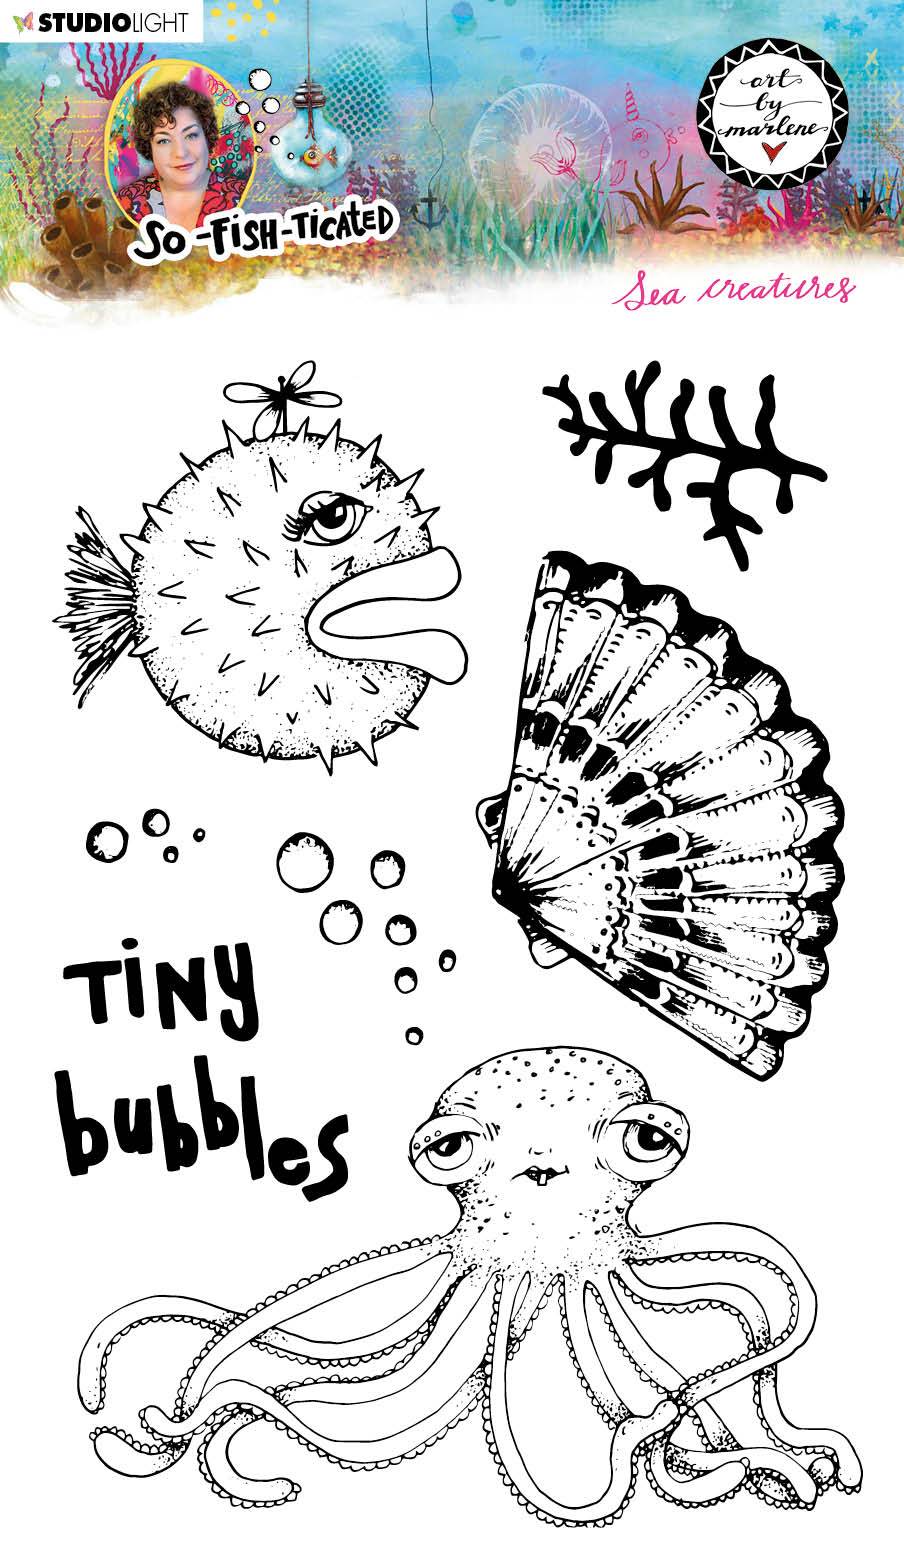 ABM Clear Stamp Sea creatures So-Fish-Ticated 148x210mm nr.13